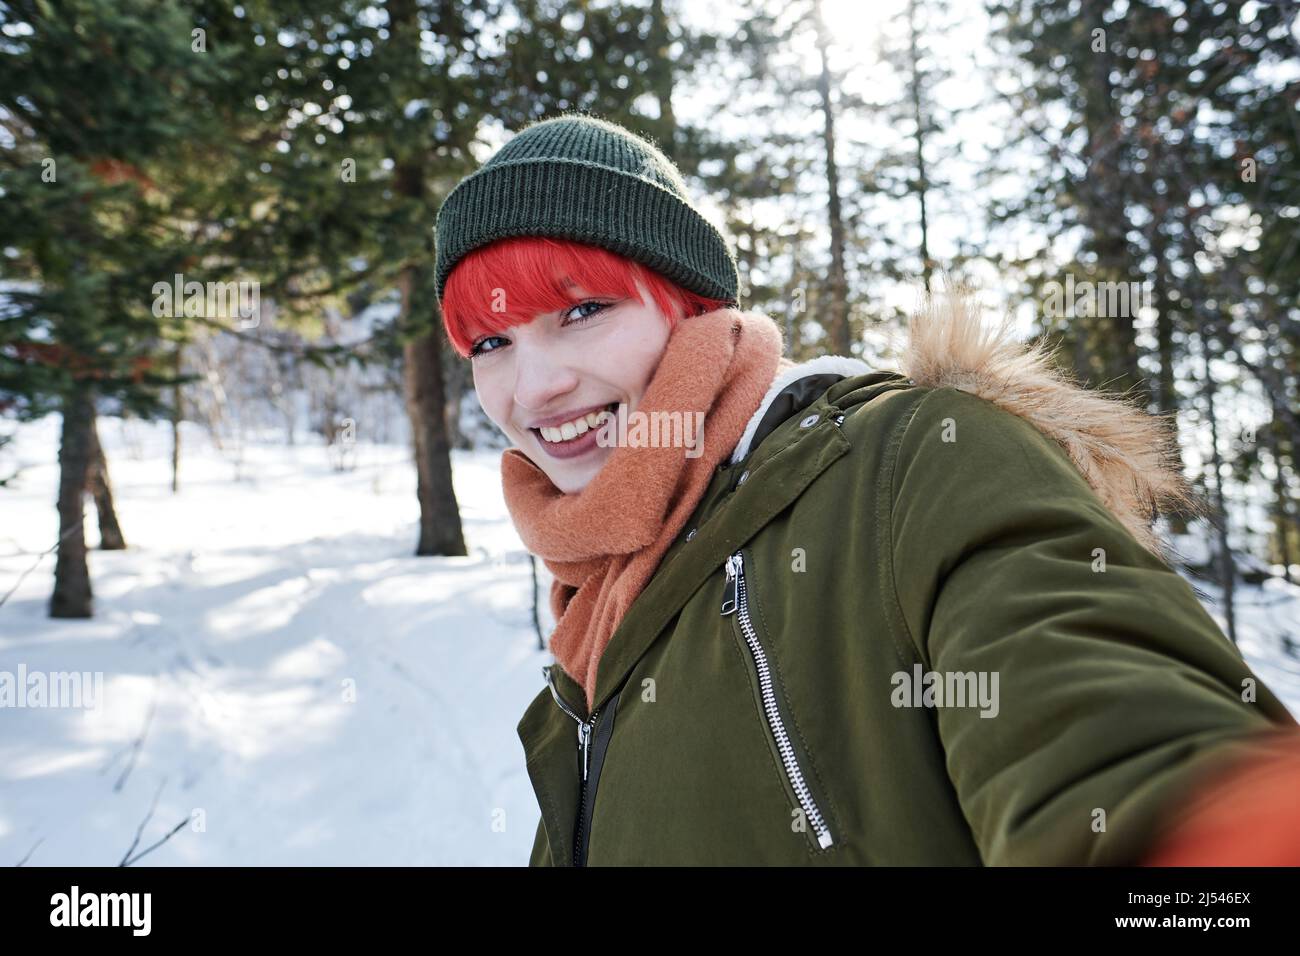 Portrait of joyful gen Z Caucasian girl with red hair taking selfie photo outdoors on winter day smiling at camera Stock Photo